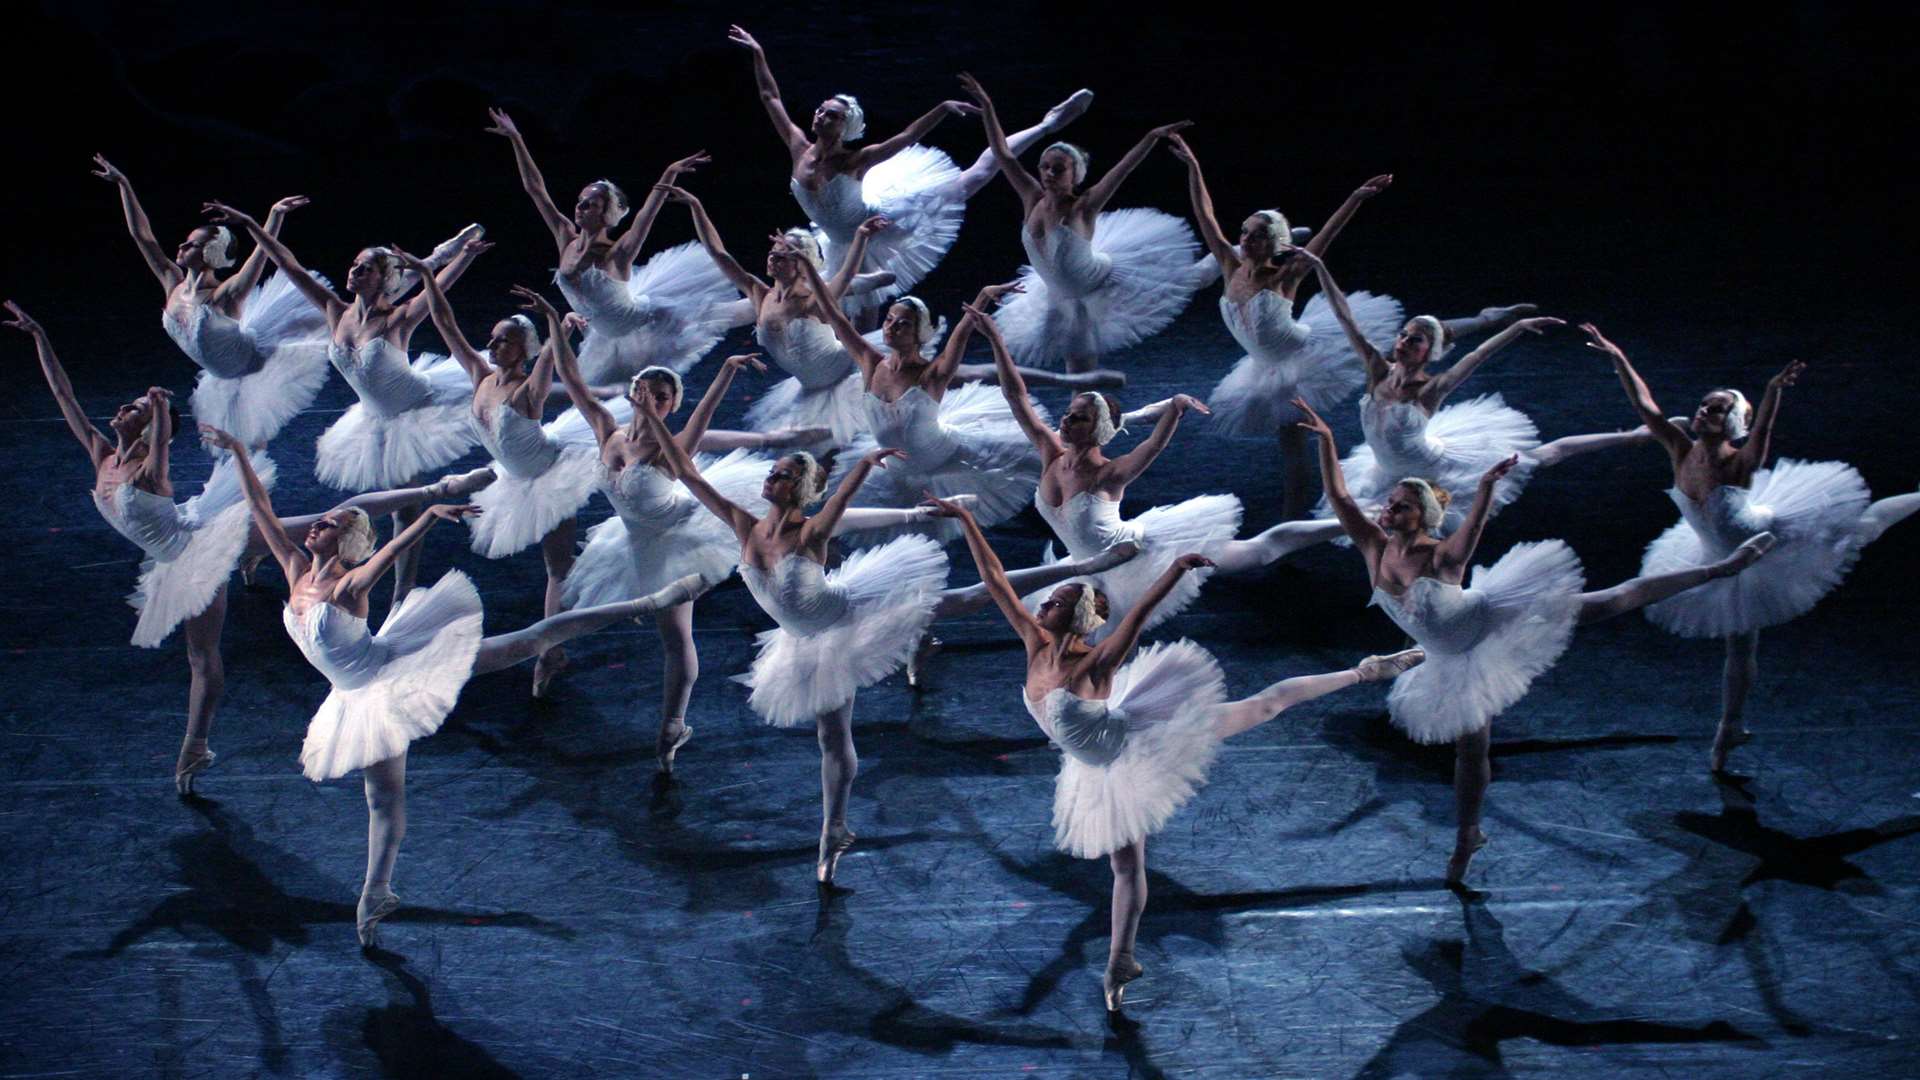 Moscow City Ballet perform Swan Lake